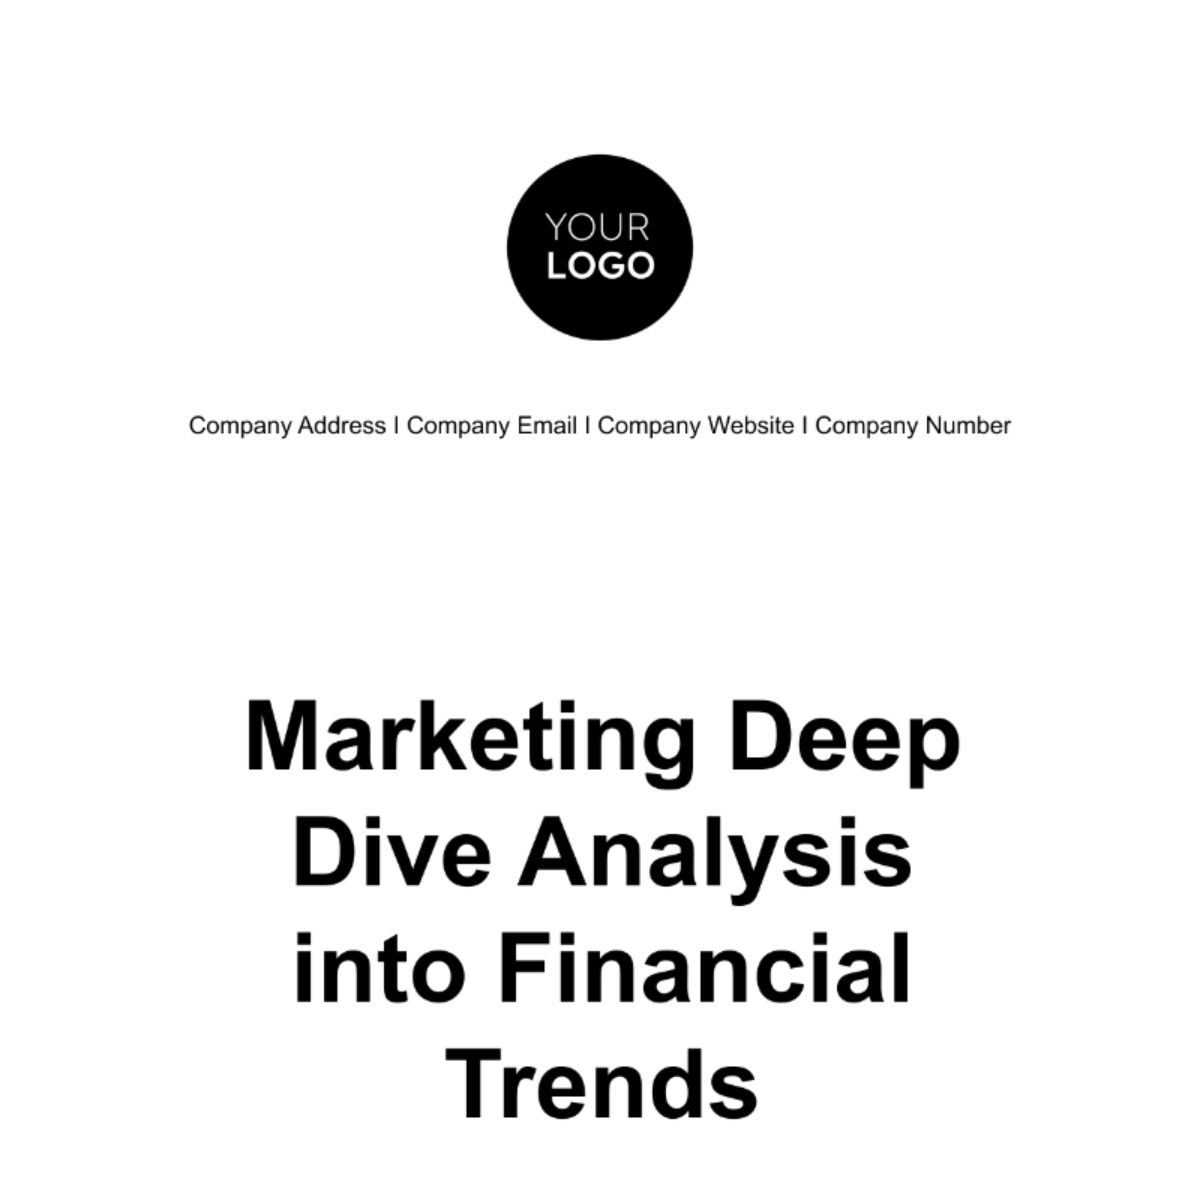 Marketing Deep Dive Analysis into Financial Trends Template